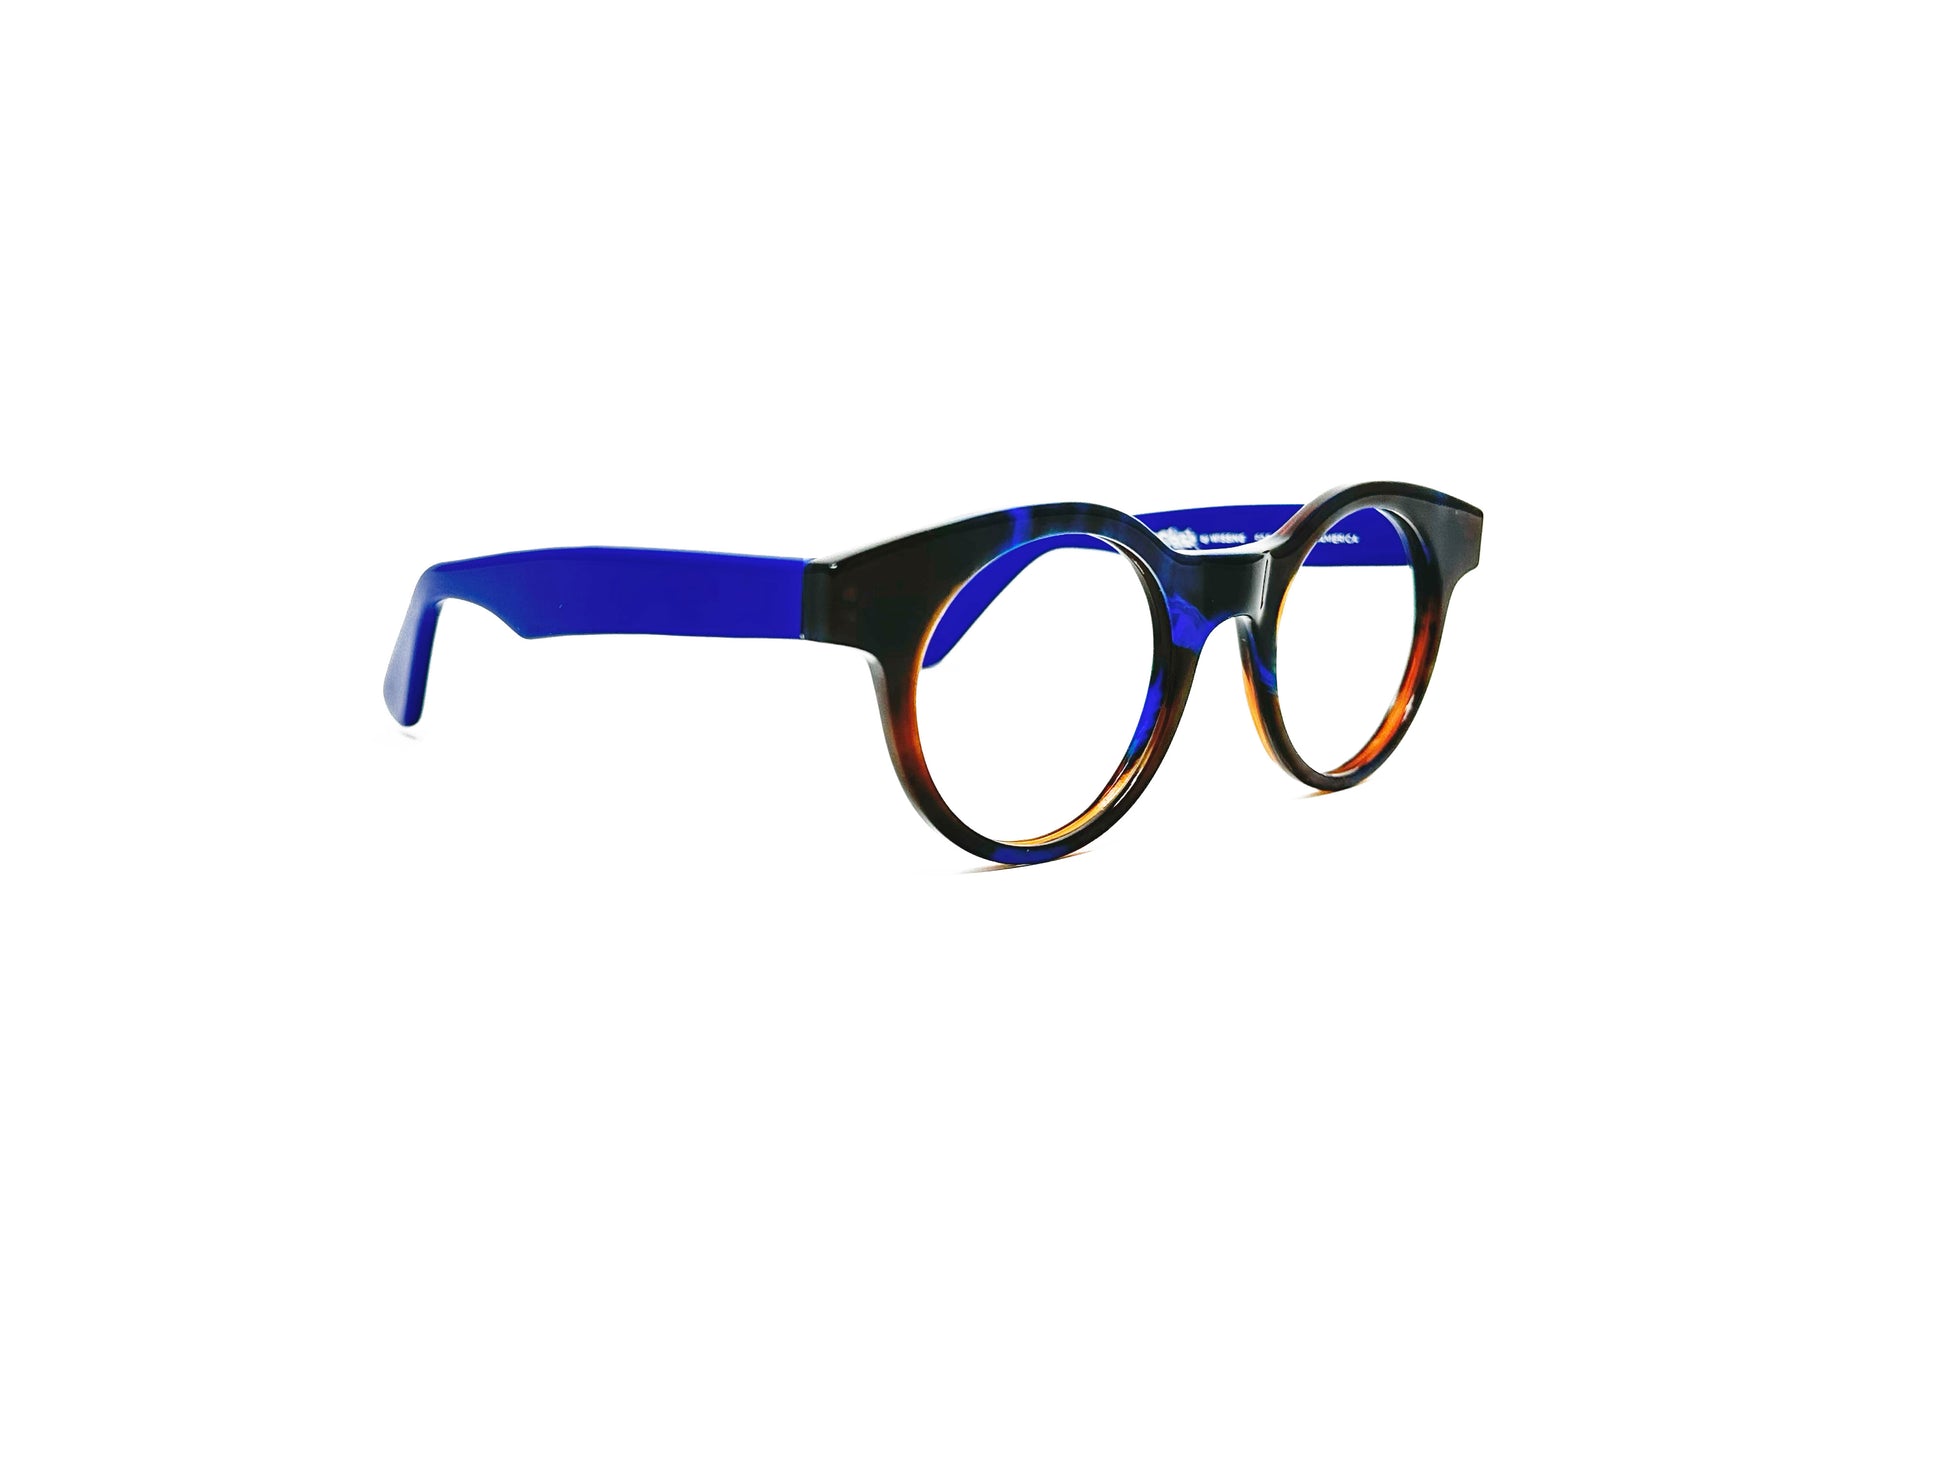 Viktlos round acetate optical frame. Model: 0590. Color: 0491 - Blue and dark brown. Side view.